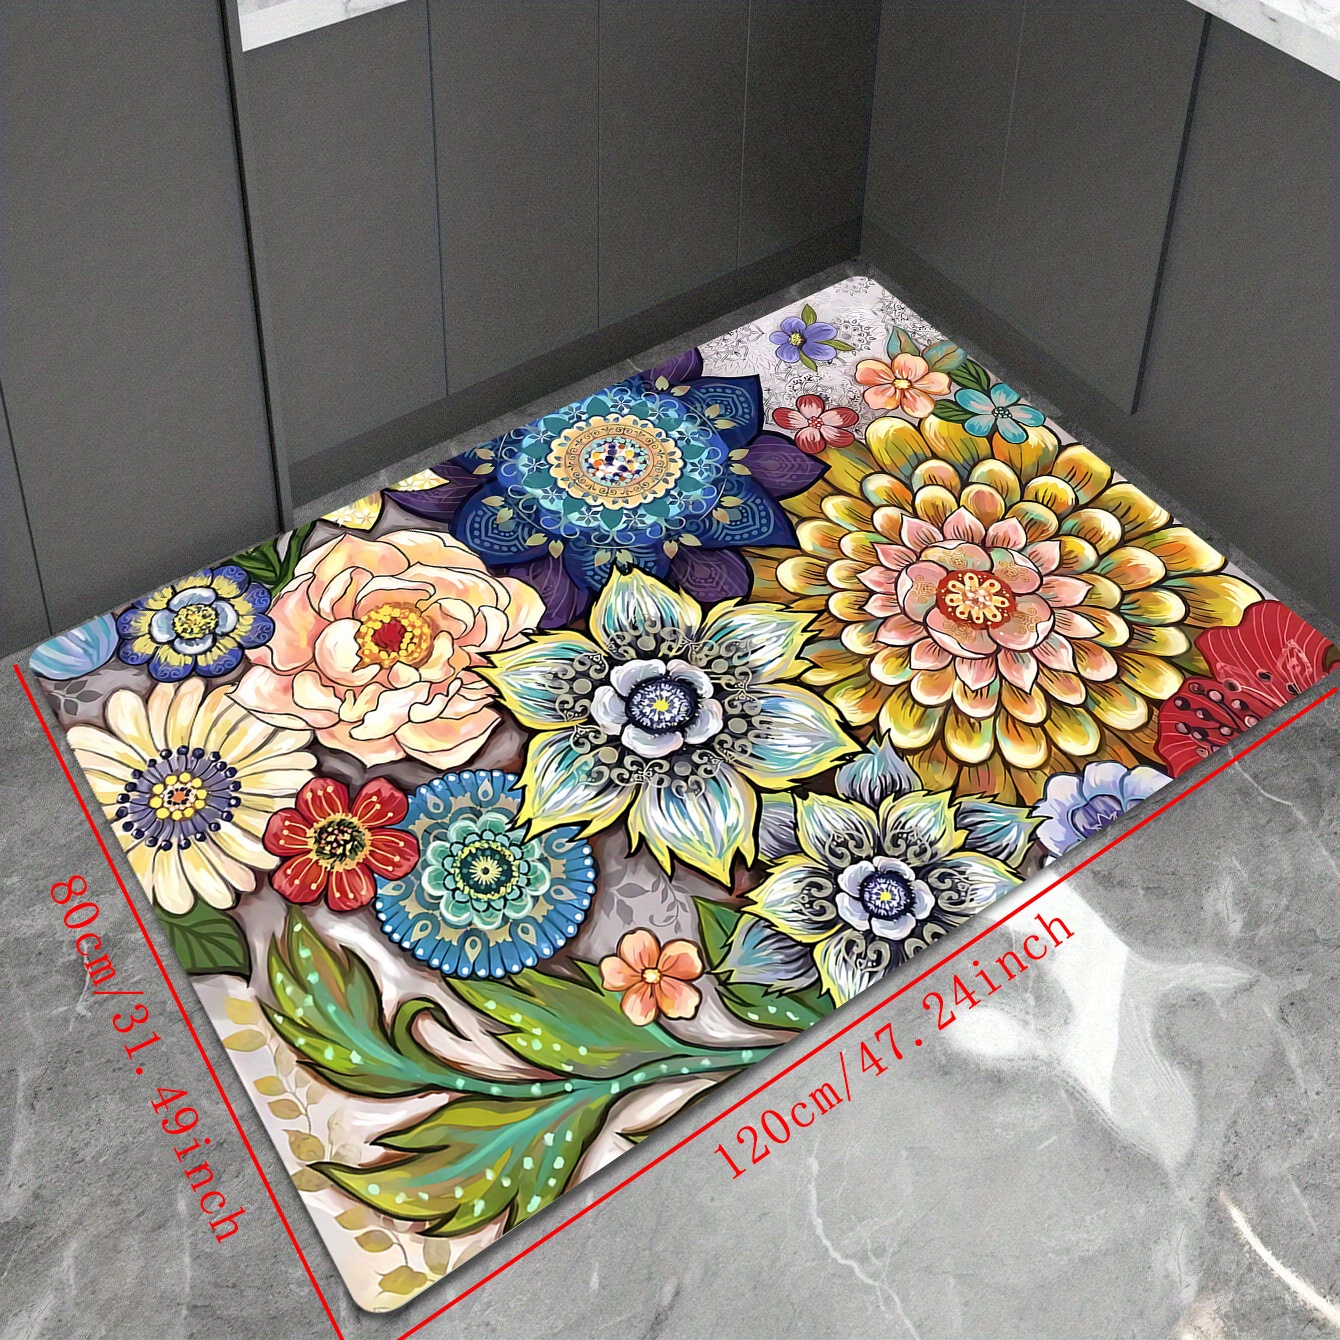 Floral 2 Pcs Anti Fatigue Herbs Floral Kitchen Floor Mat Washable Wate –  Joanna Home